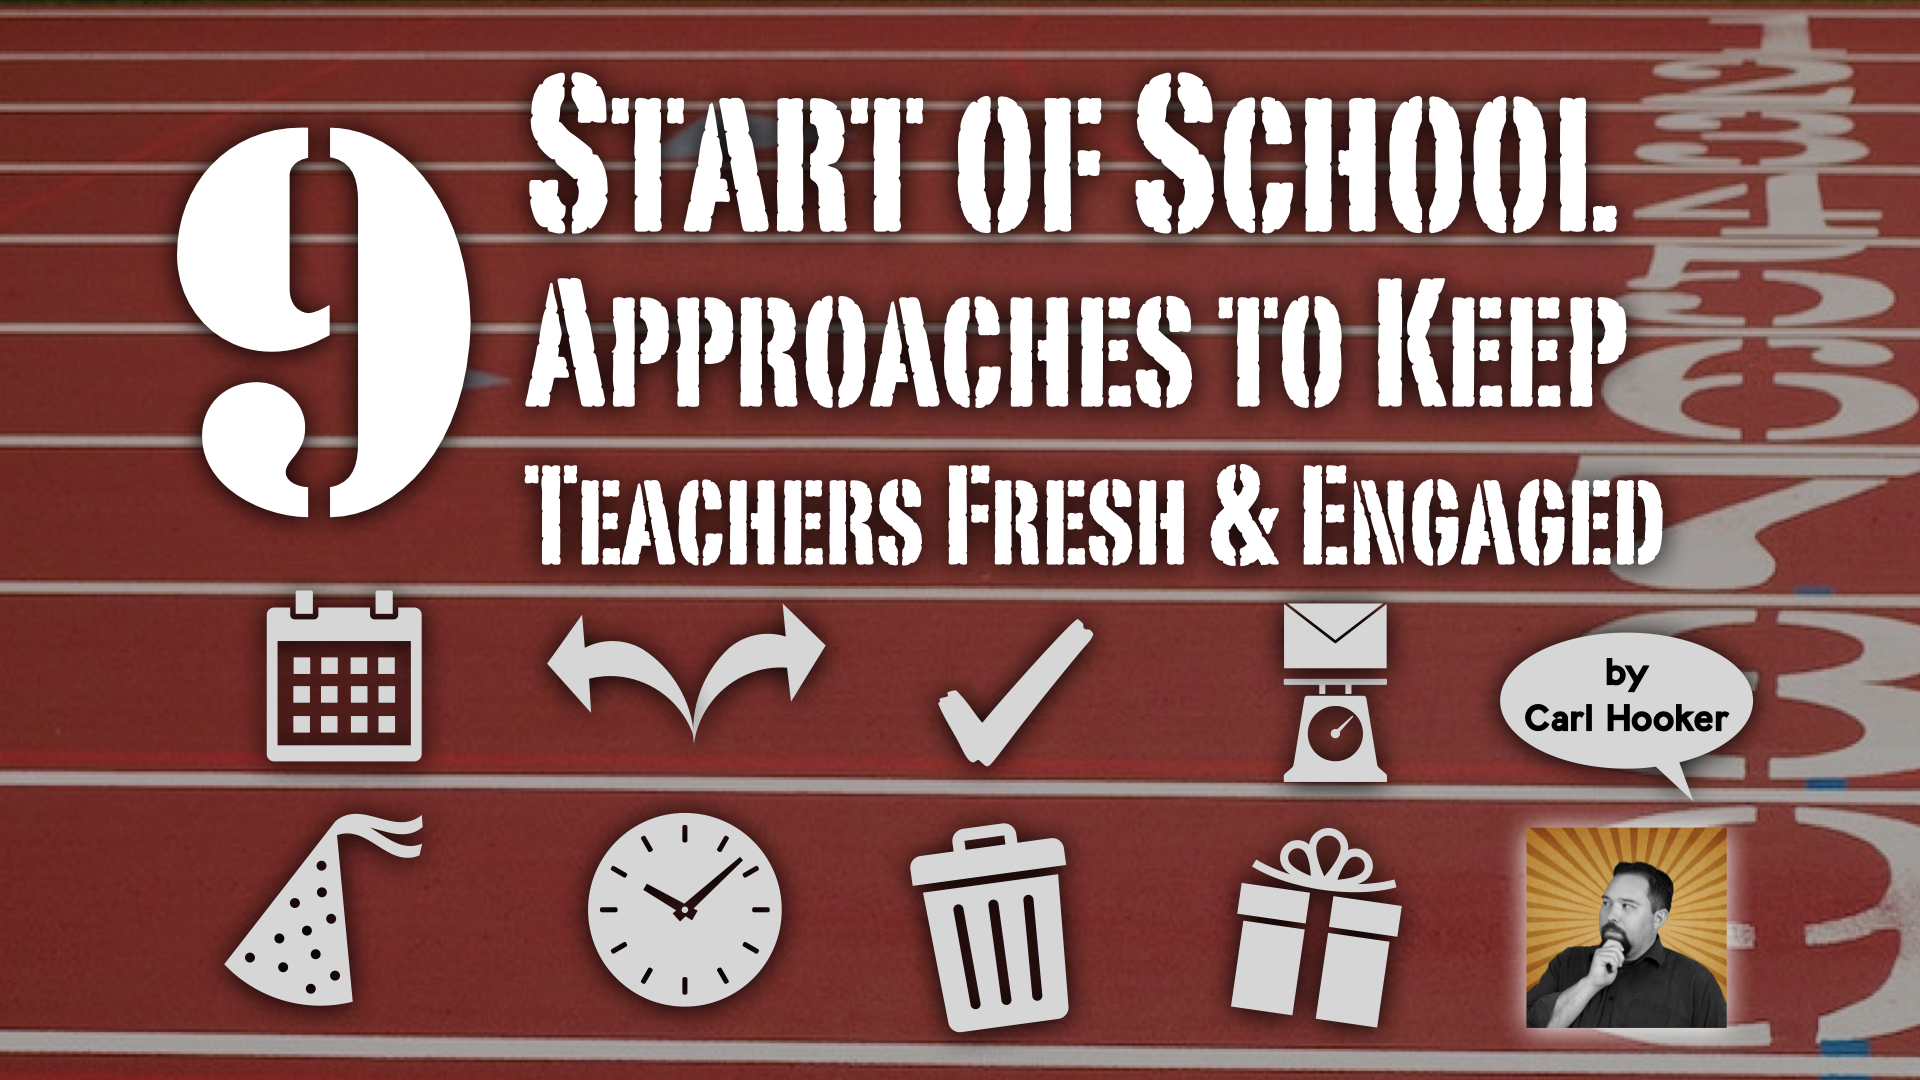 Title graphic with 9 Start of School Approaches to Keep Teachers Fresh and Engaged.